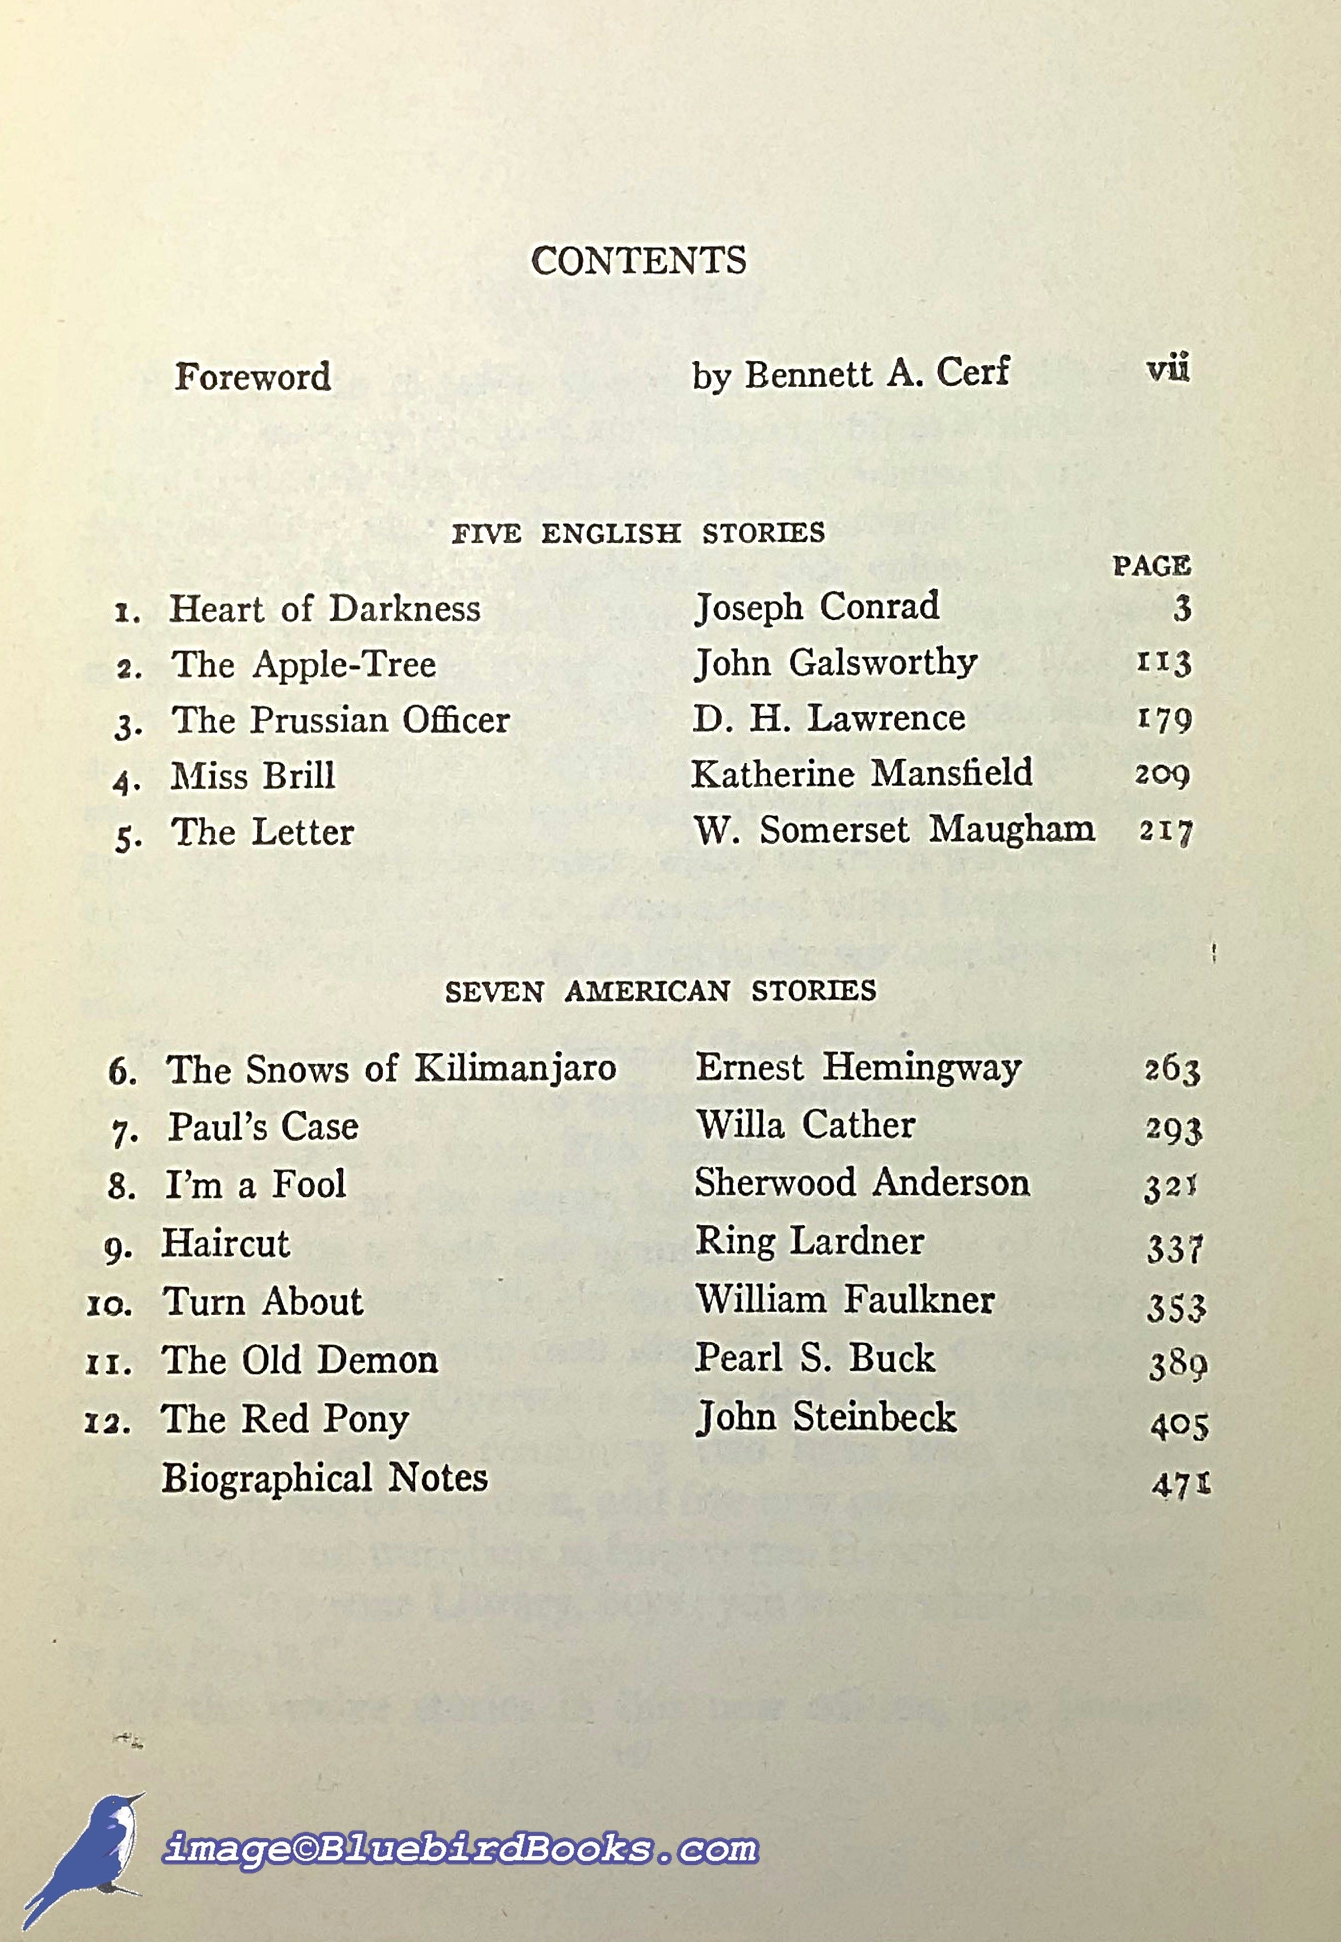 CERF, BENNETT (SELECTOR AND FOREWORD) - Great Modern Short Stories: An Anthology of Twelve Famous Stories and Novelettes (Modern Library #168. 2)